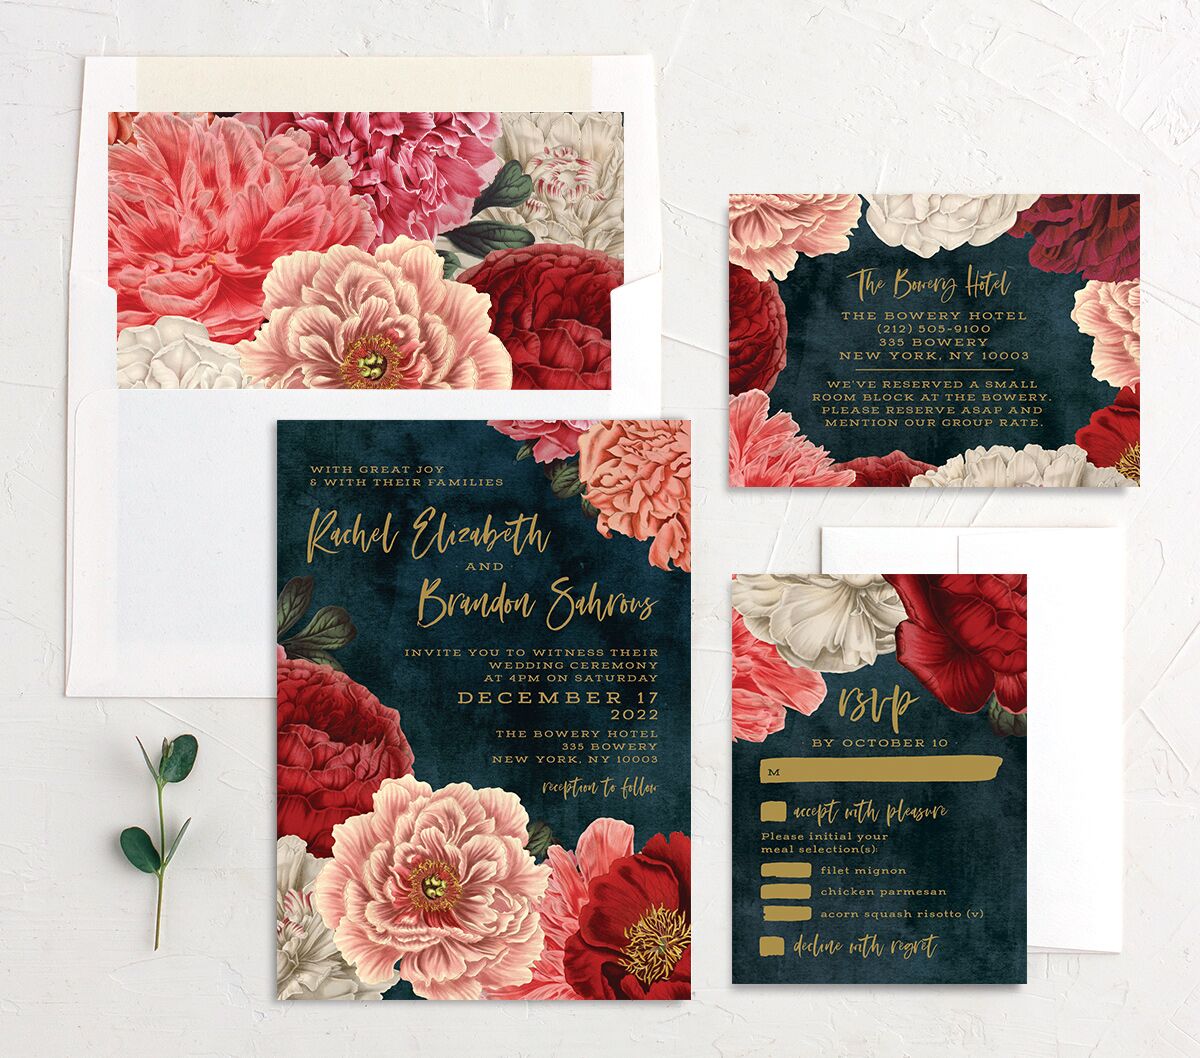 Night Sky Blooms Wedding Invitations suite in French Blue